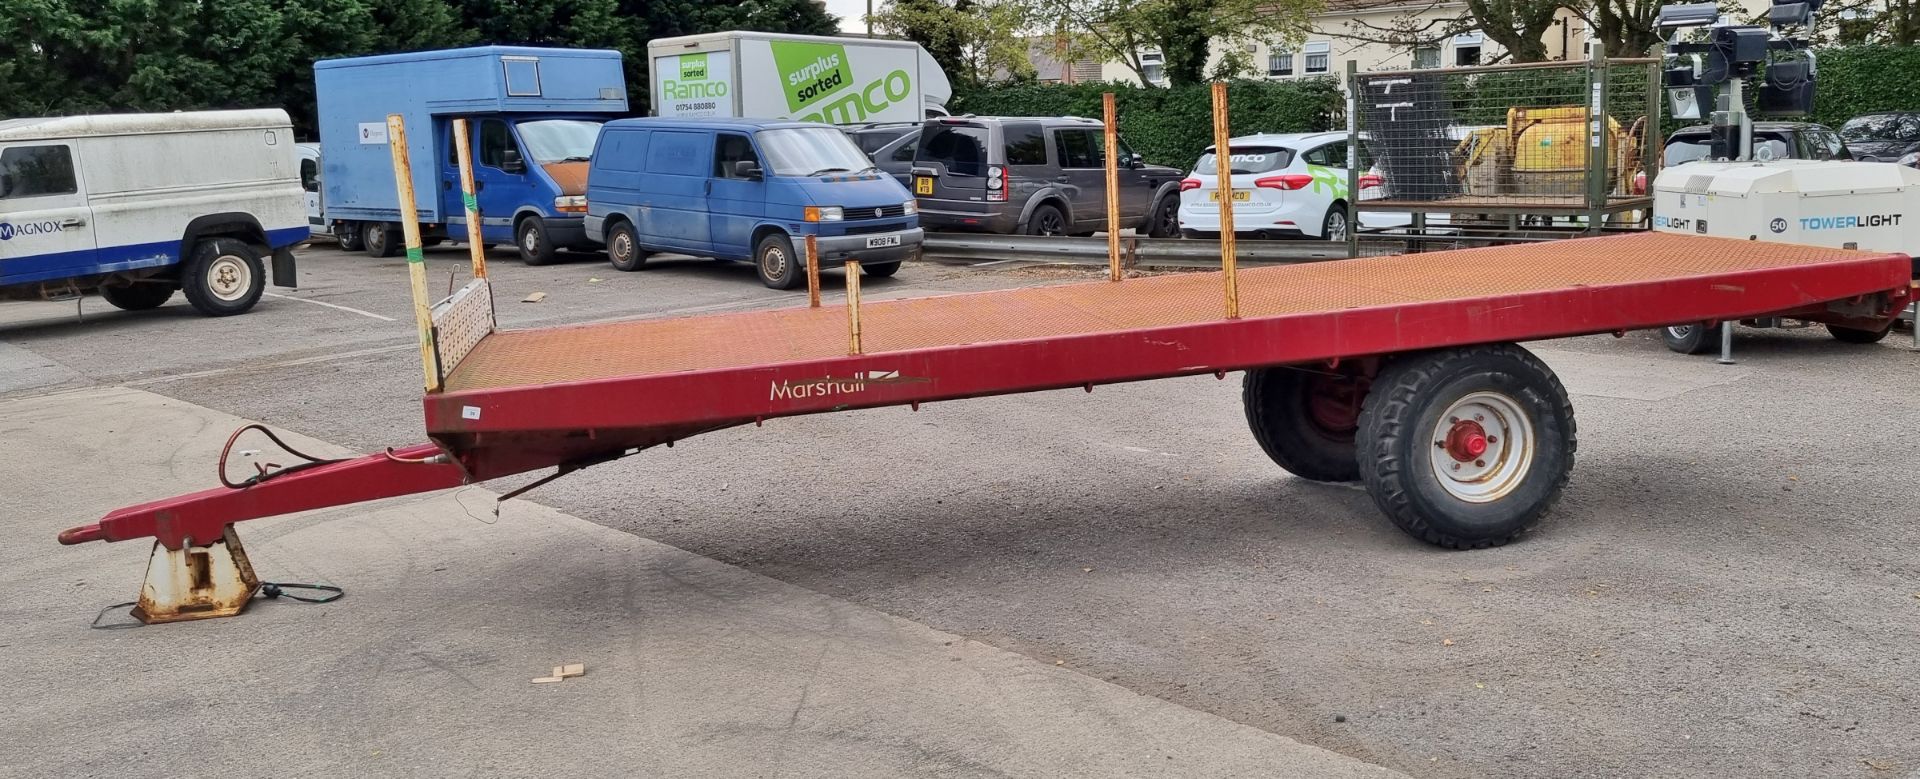 Marshall BC18N 2019 single axle flatbed trailer - 5000 kg carrying capacity - 40kph max design speed - Image 3 of 9